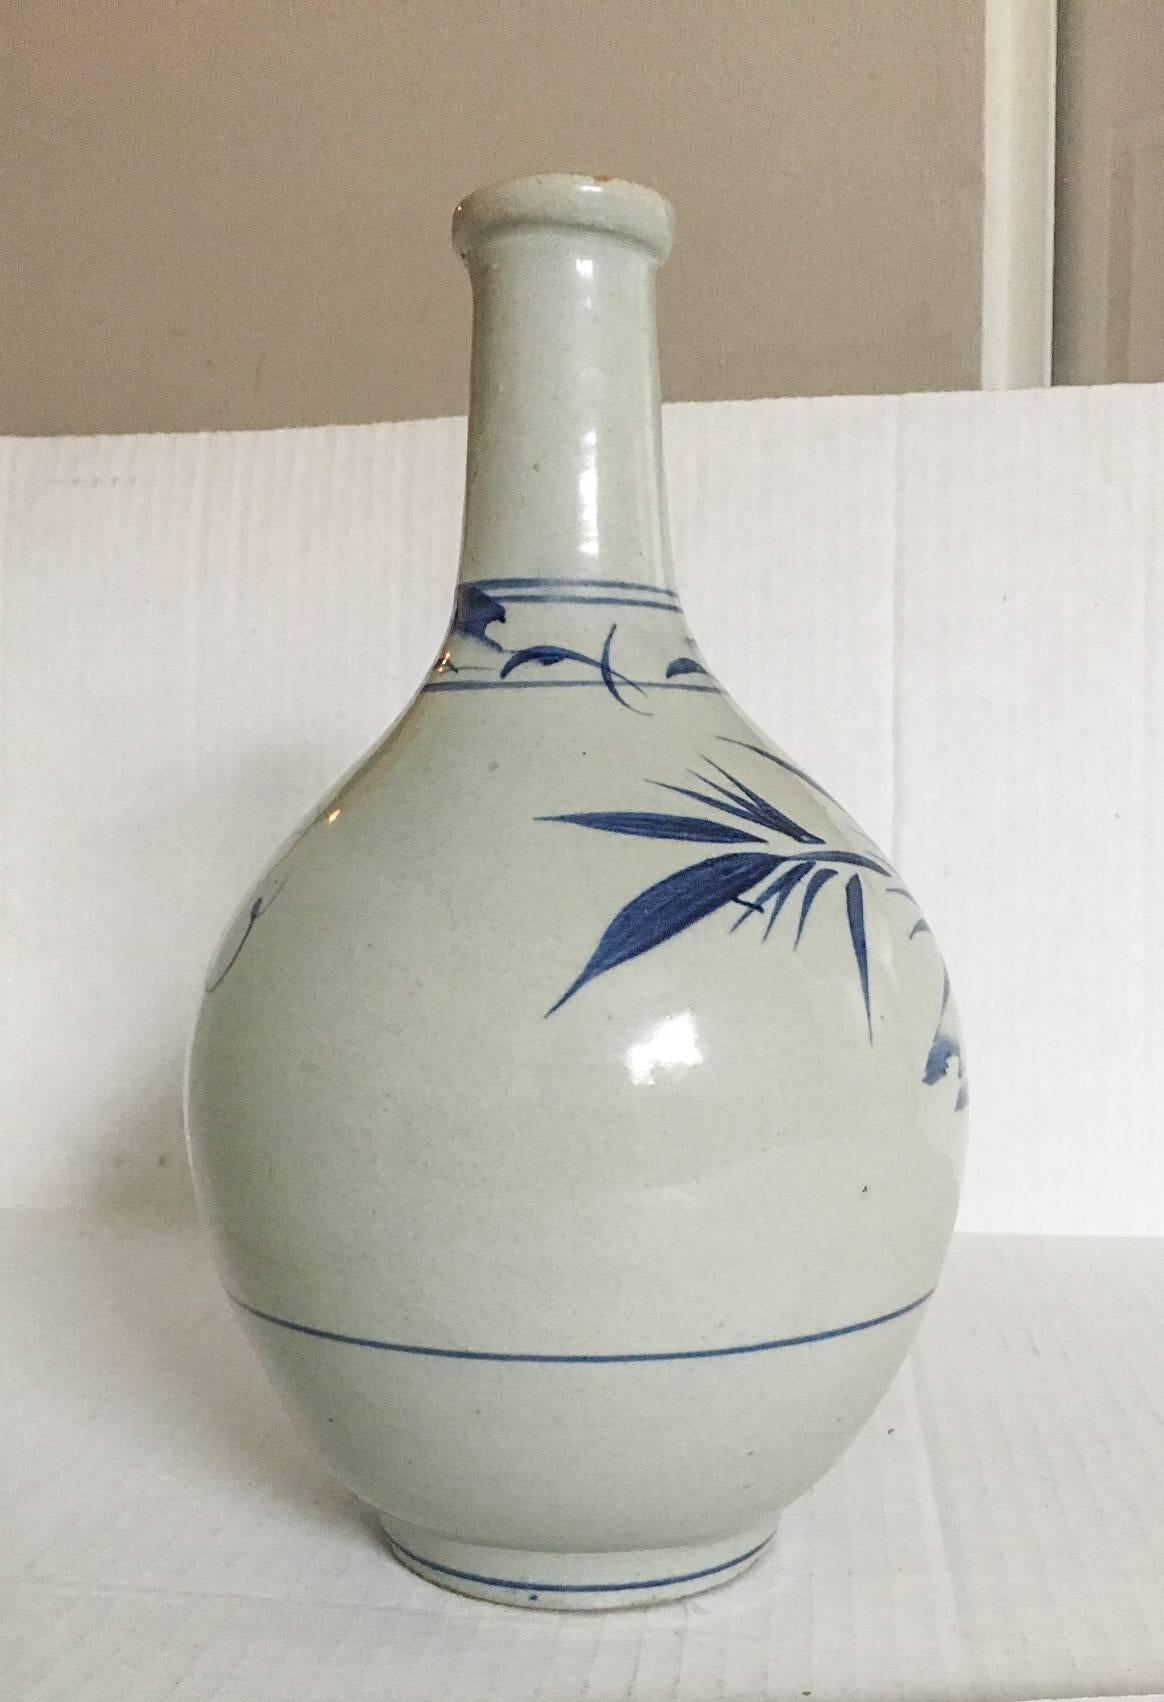 Wonderful antique hand-thrown pottery Japanese sake bottle, decorated with blue. Bottle leans slightly to the right when viewed from the front.